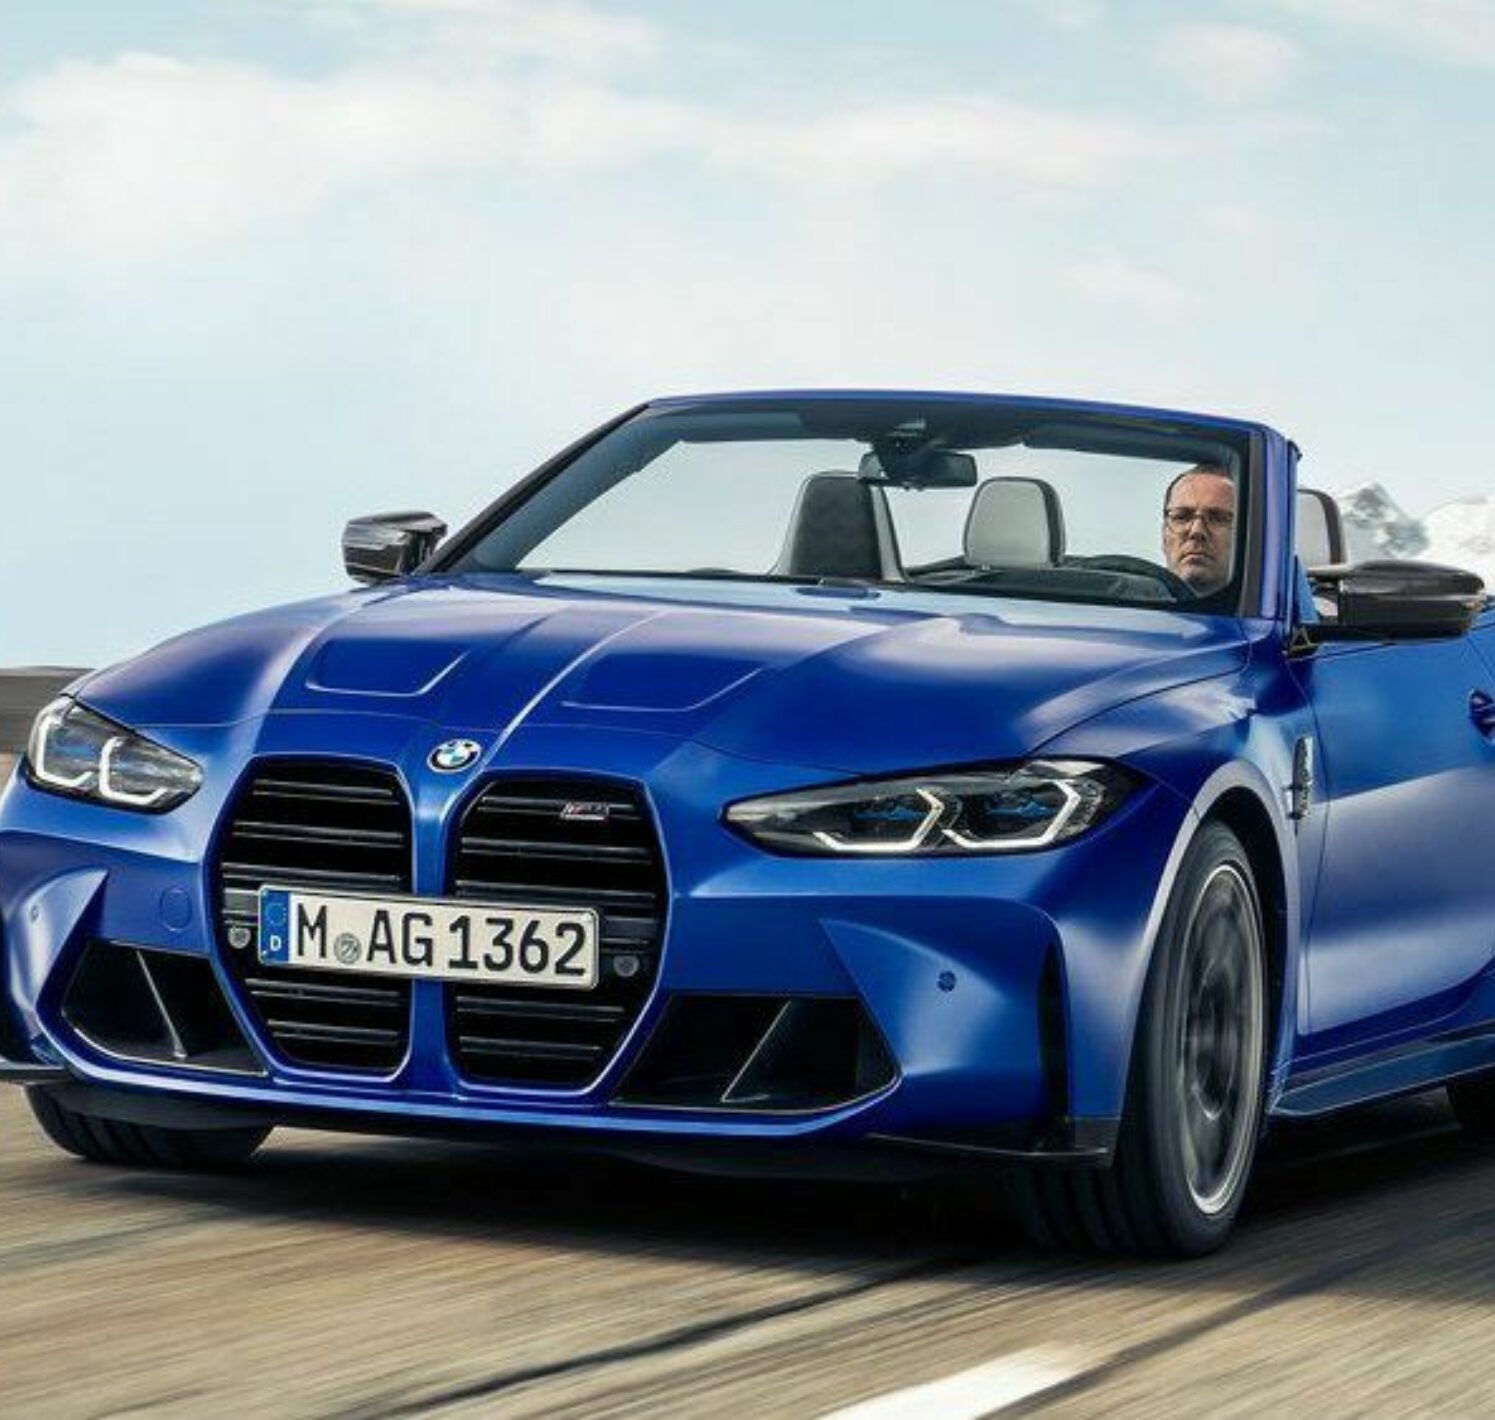 https://autofilter.sk/assets/images/m4-coupe-2/gallery/bmw-m4-competition-cabriolet-xdrive-2022_02-galeria.jpg - obrazok